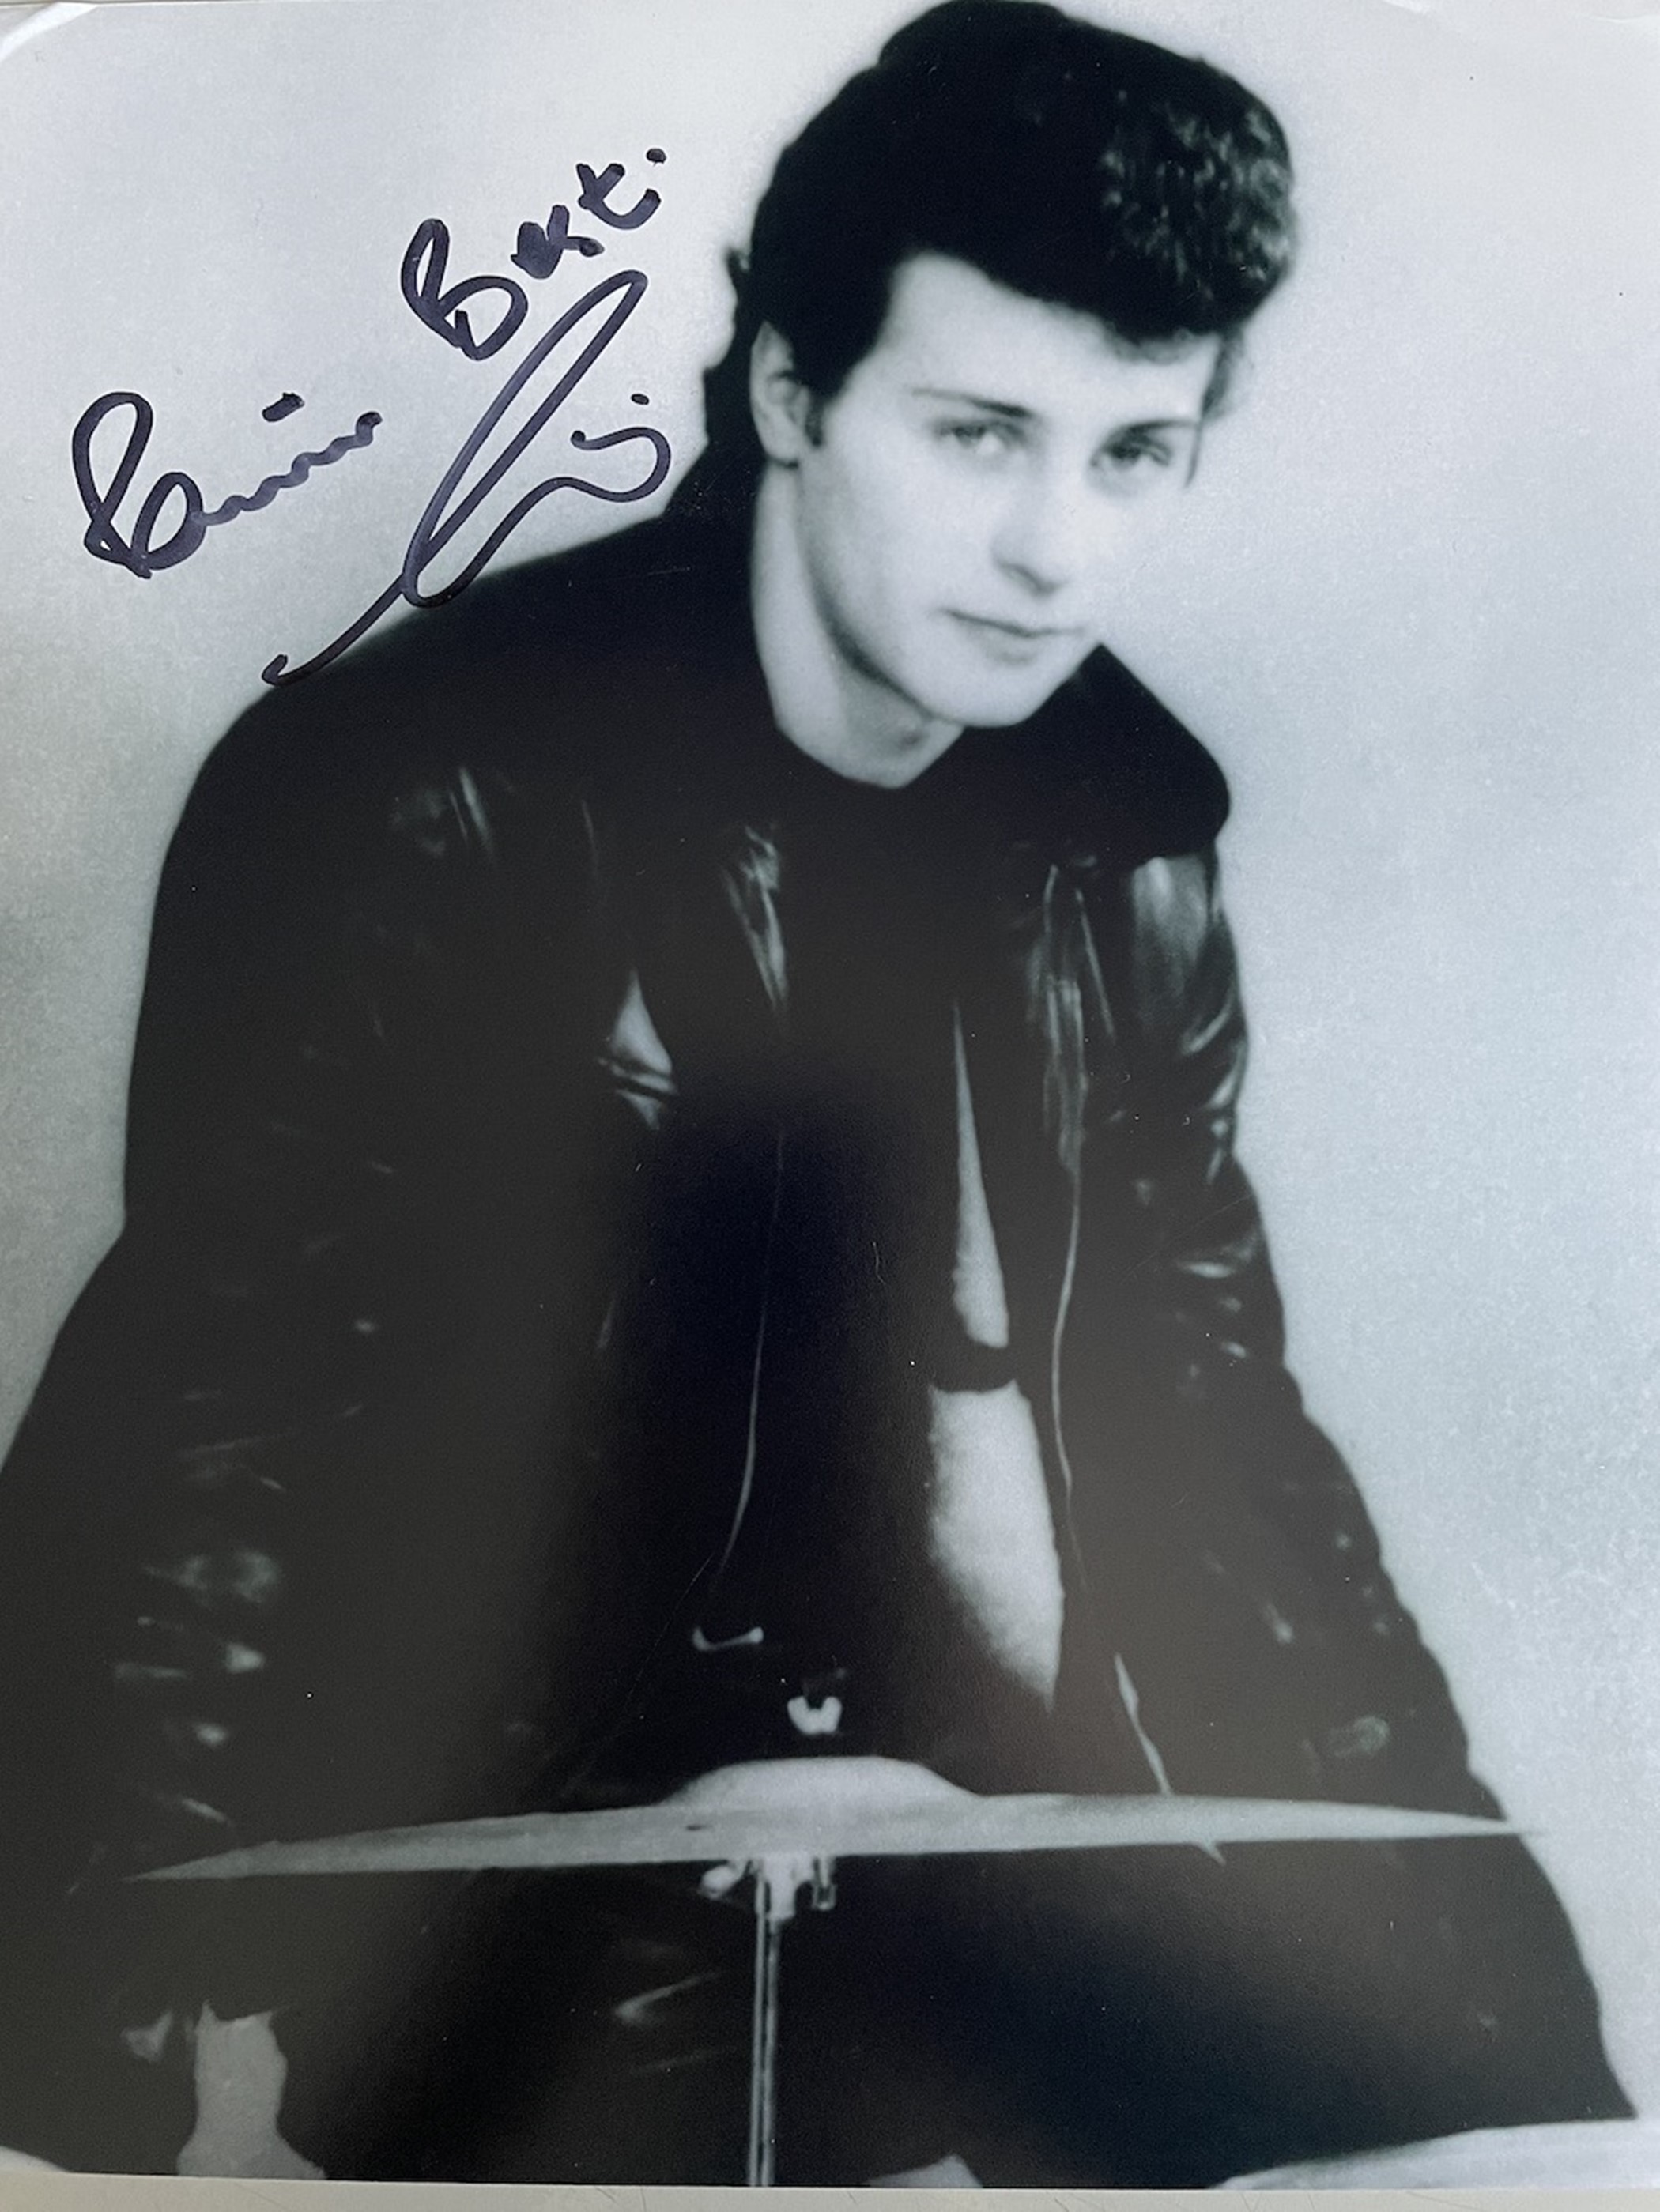 Pete Best Early Beatles Drummer Signed 10x8 inch Photo. Good condition. All autographs are genuine